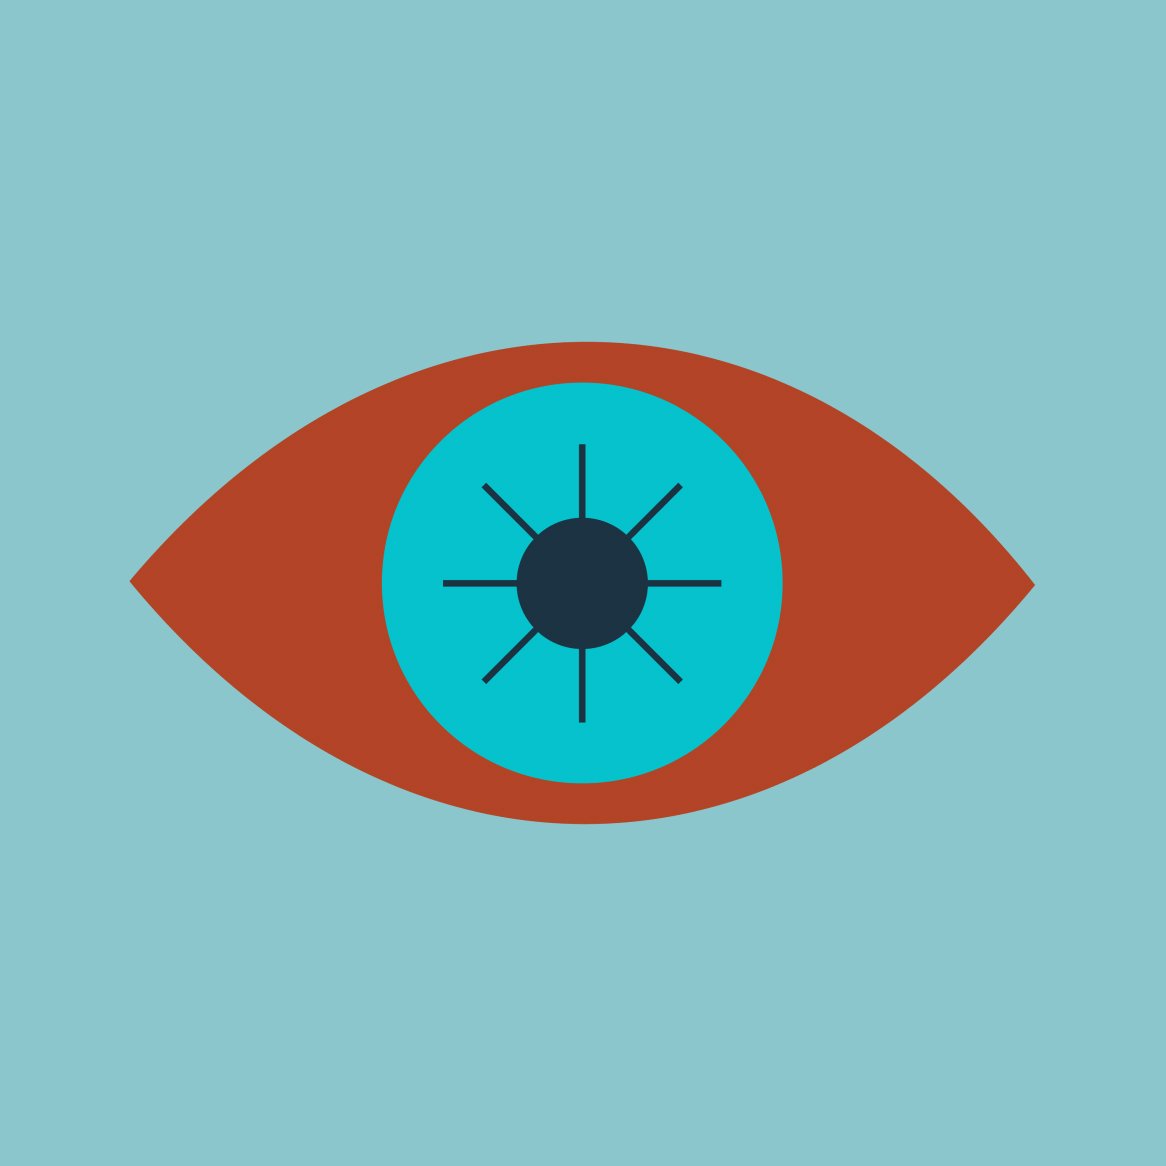 Illustration of an infected eye on a blue background